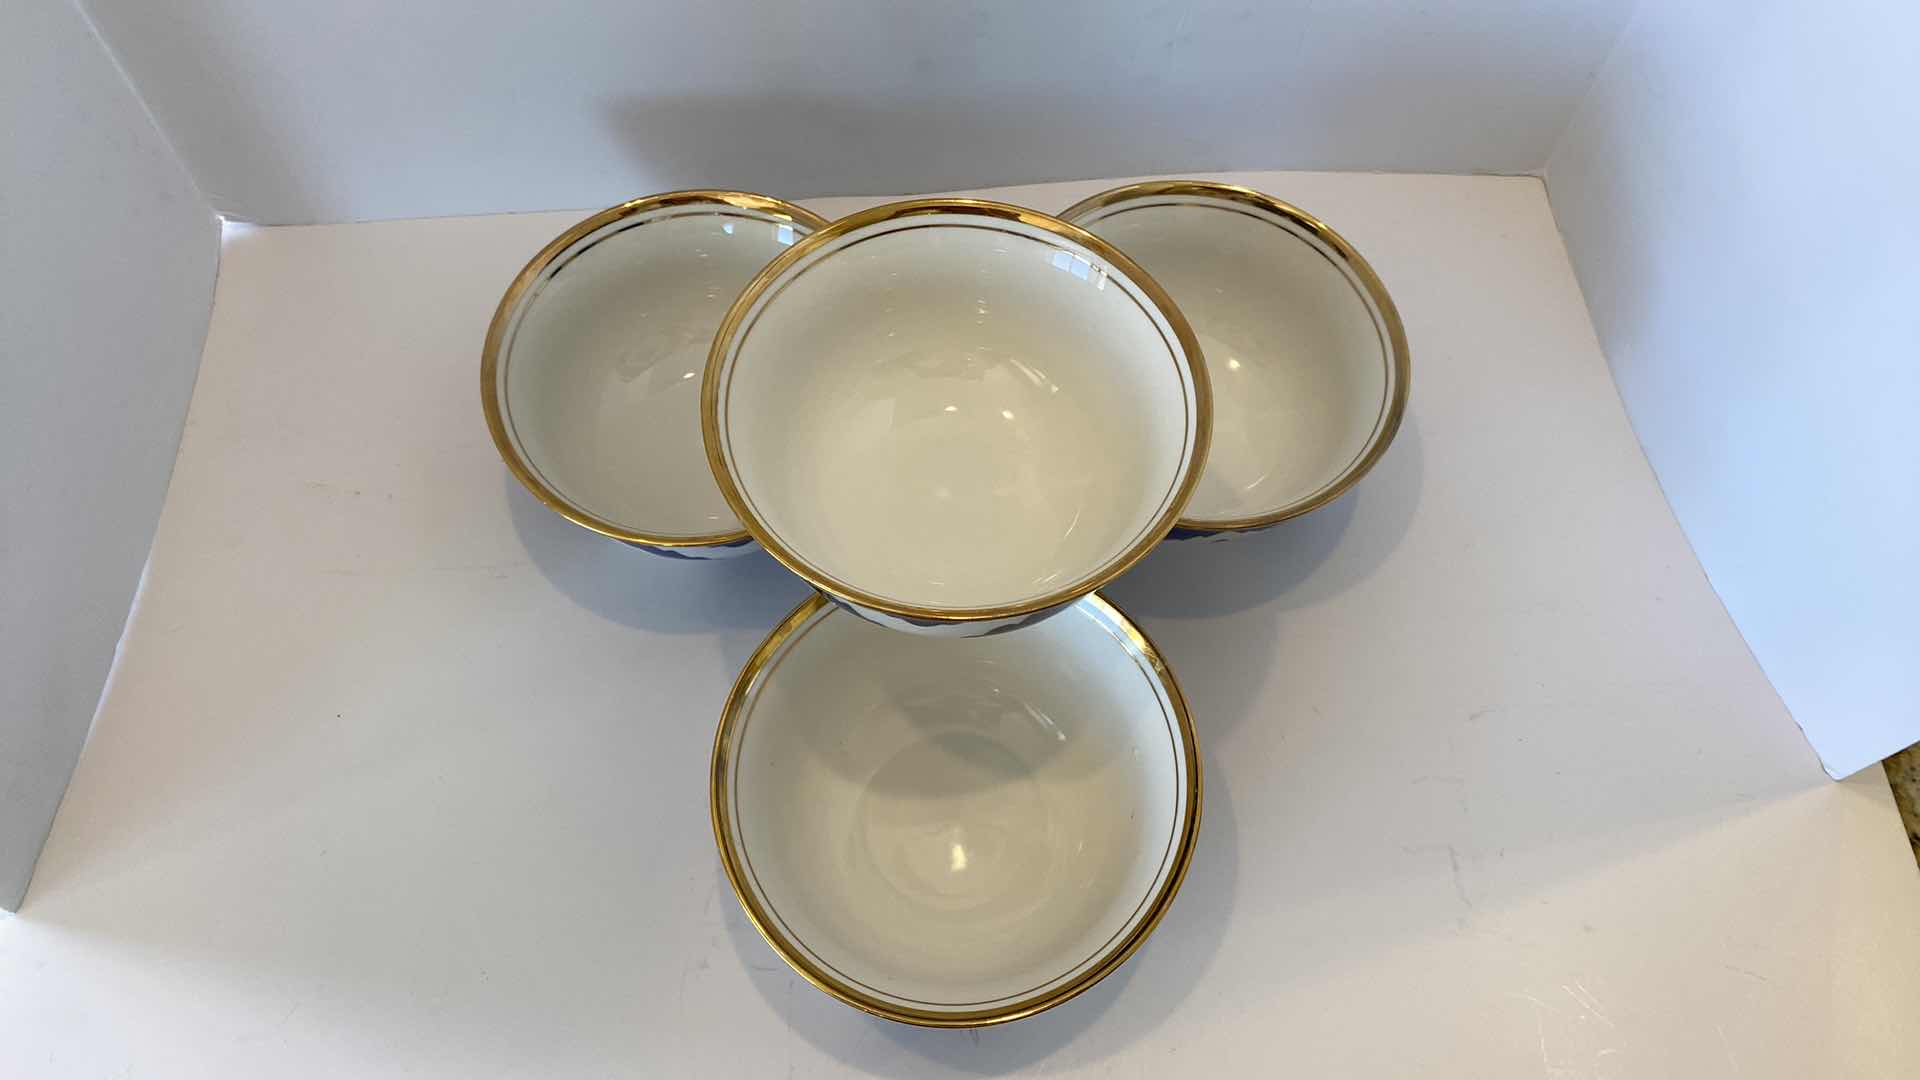 Photo 3 of CONTENTS OF KITCHEN CABINET - 4 GOLD RIMMED GRACE CEREAL BOWLS